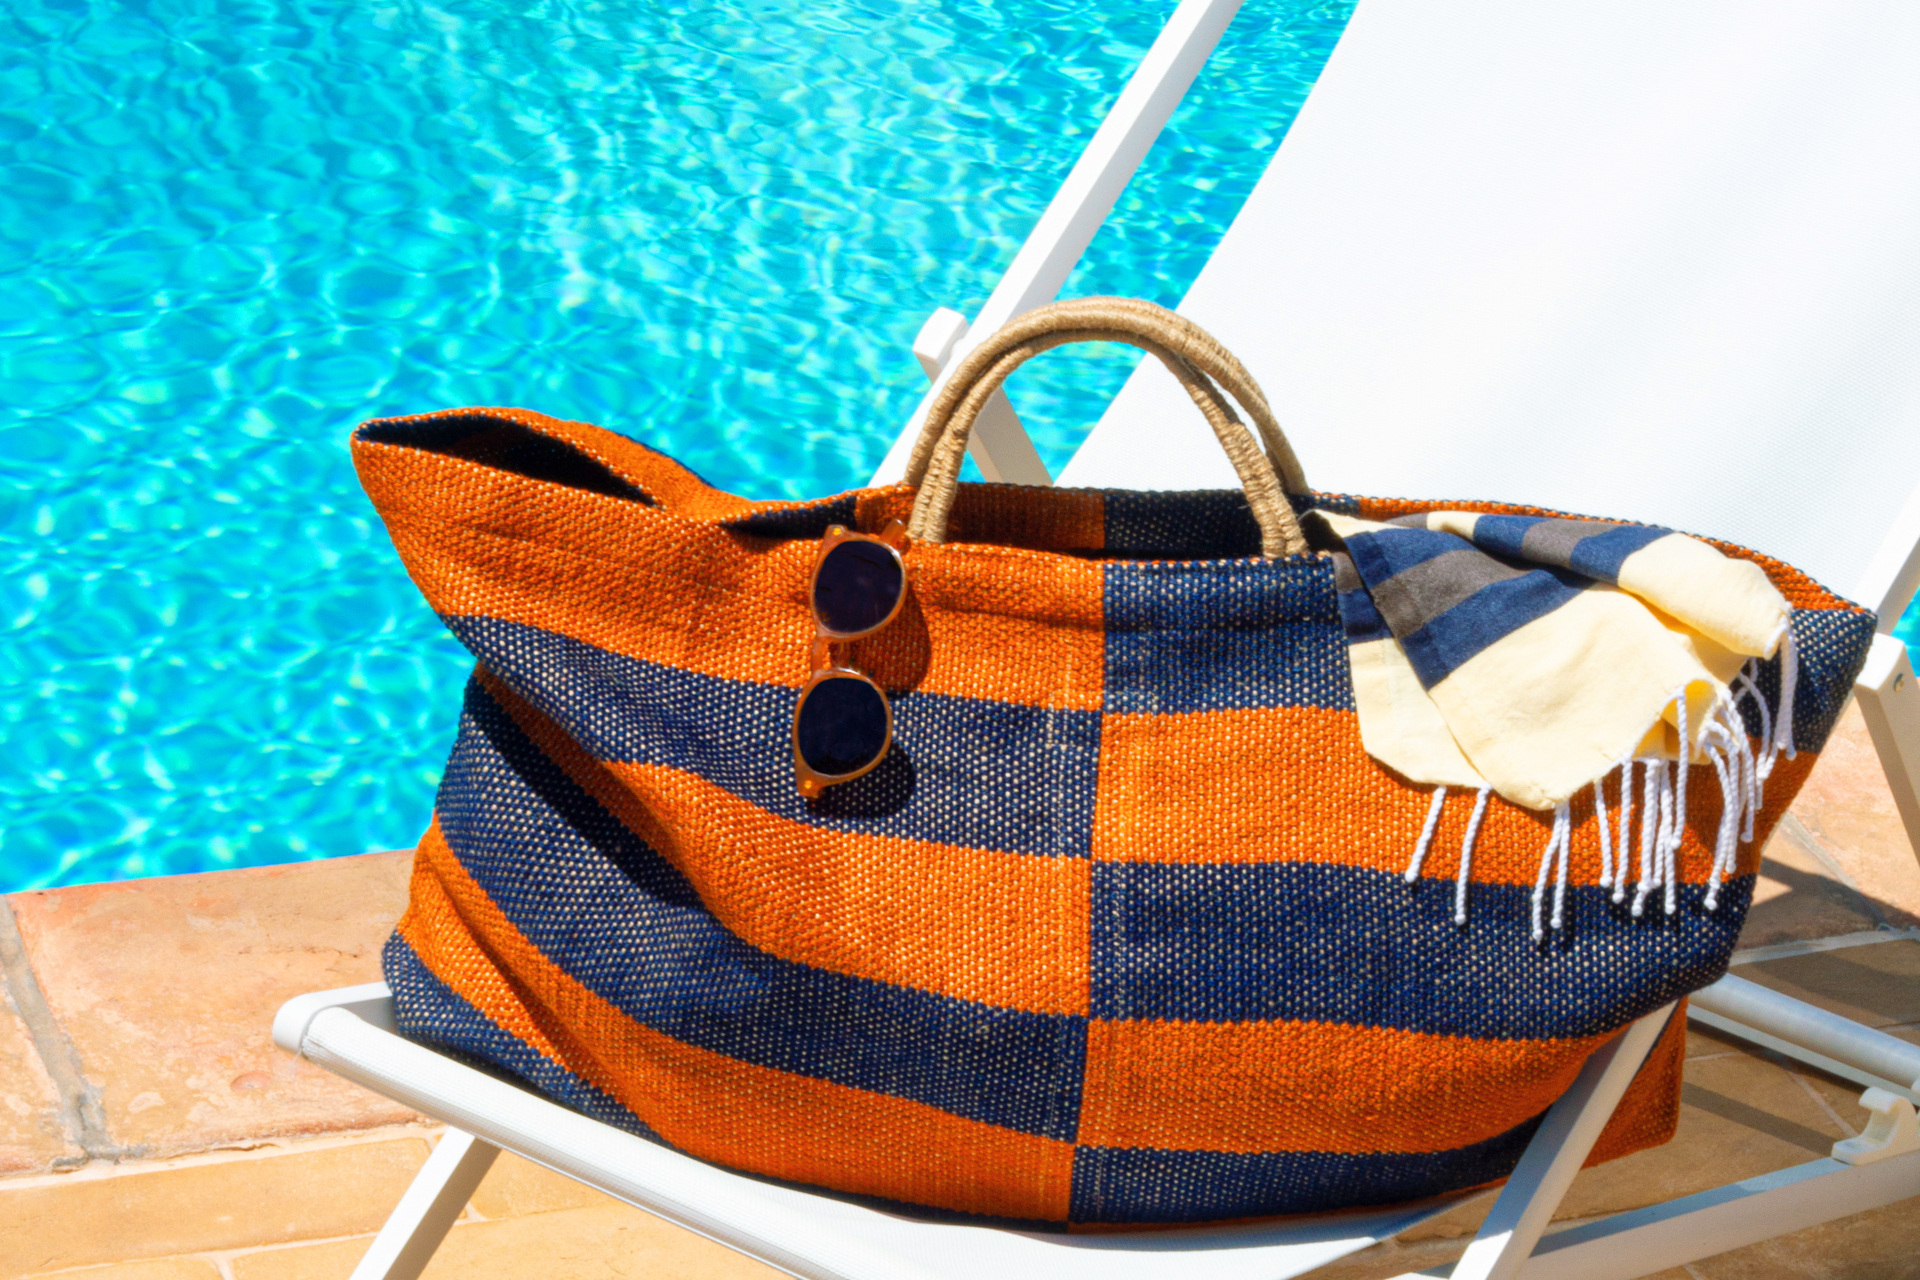 Navy and orange check striped bag on a sung lounger by the pool